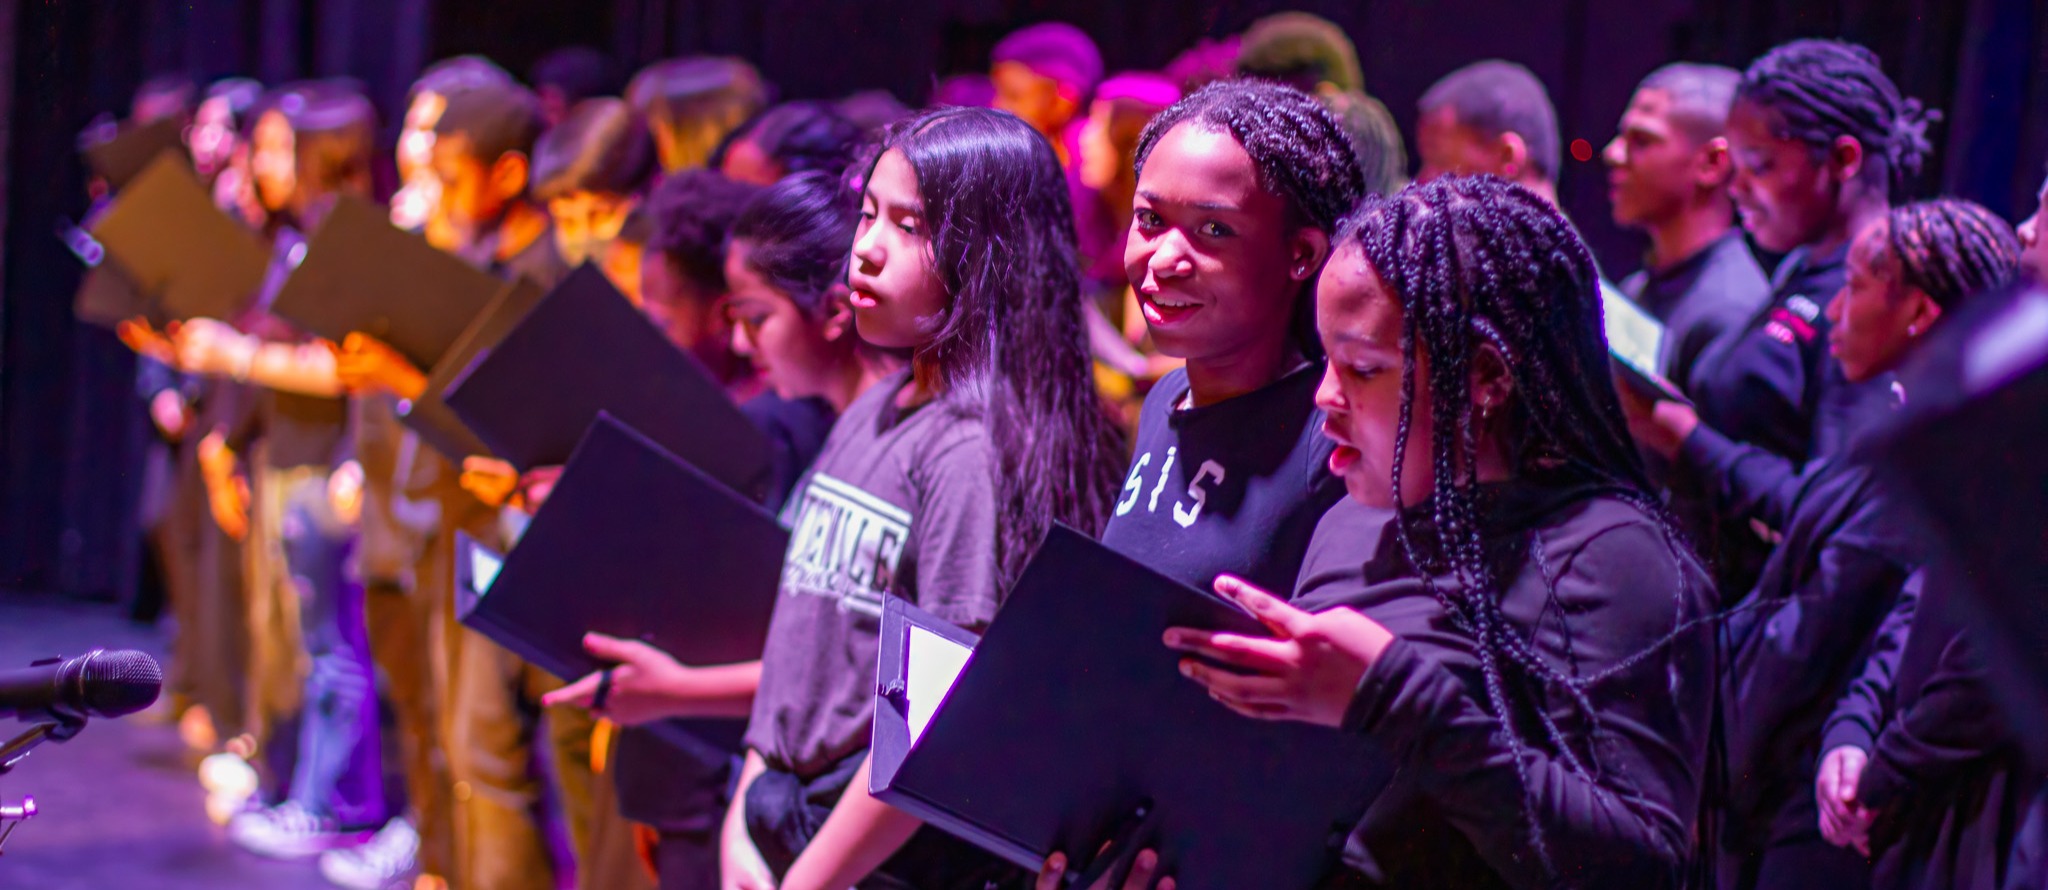 A diverse group of students stands on stage in a choir formation, holding black folders. They are illuminated by purple and orange stage lighting. The students appear to be singing or performing, with some looking at their folders and others facing forward. The image captures a mix of ethnicities and ages among the performers. In the foreground, several students are in focus, including young women with long hair and braids. The ABSS (Alamance-Burlington School System) logo is visible in the bottom right corner of the image.